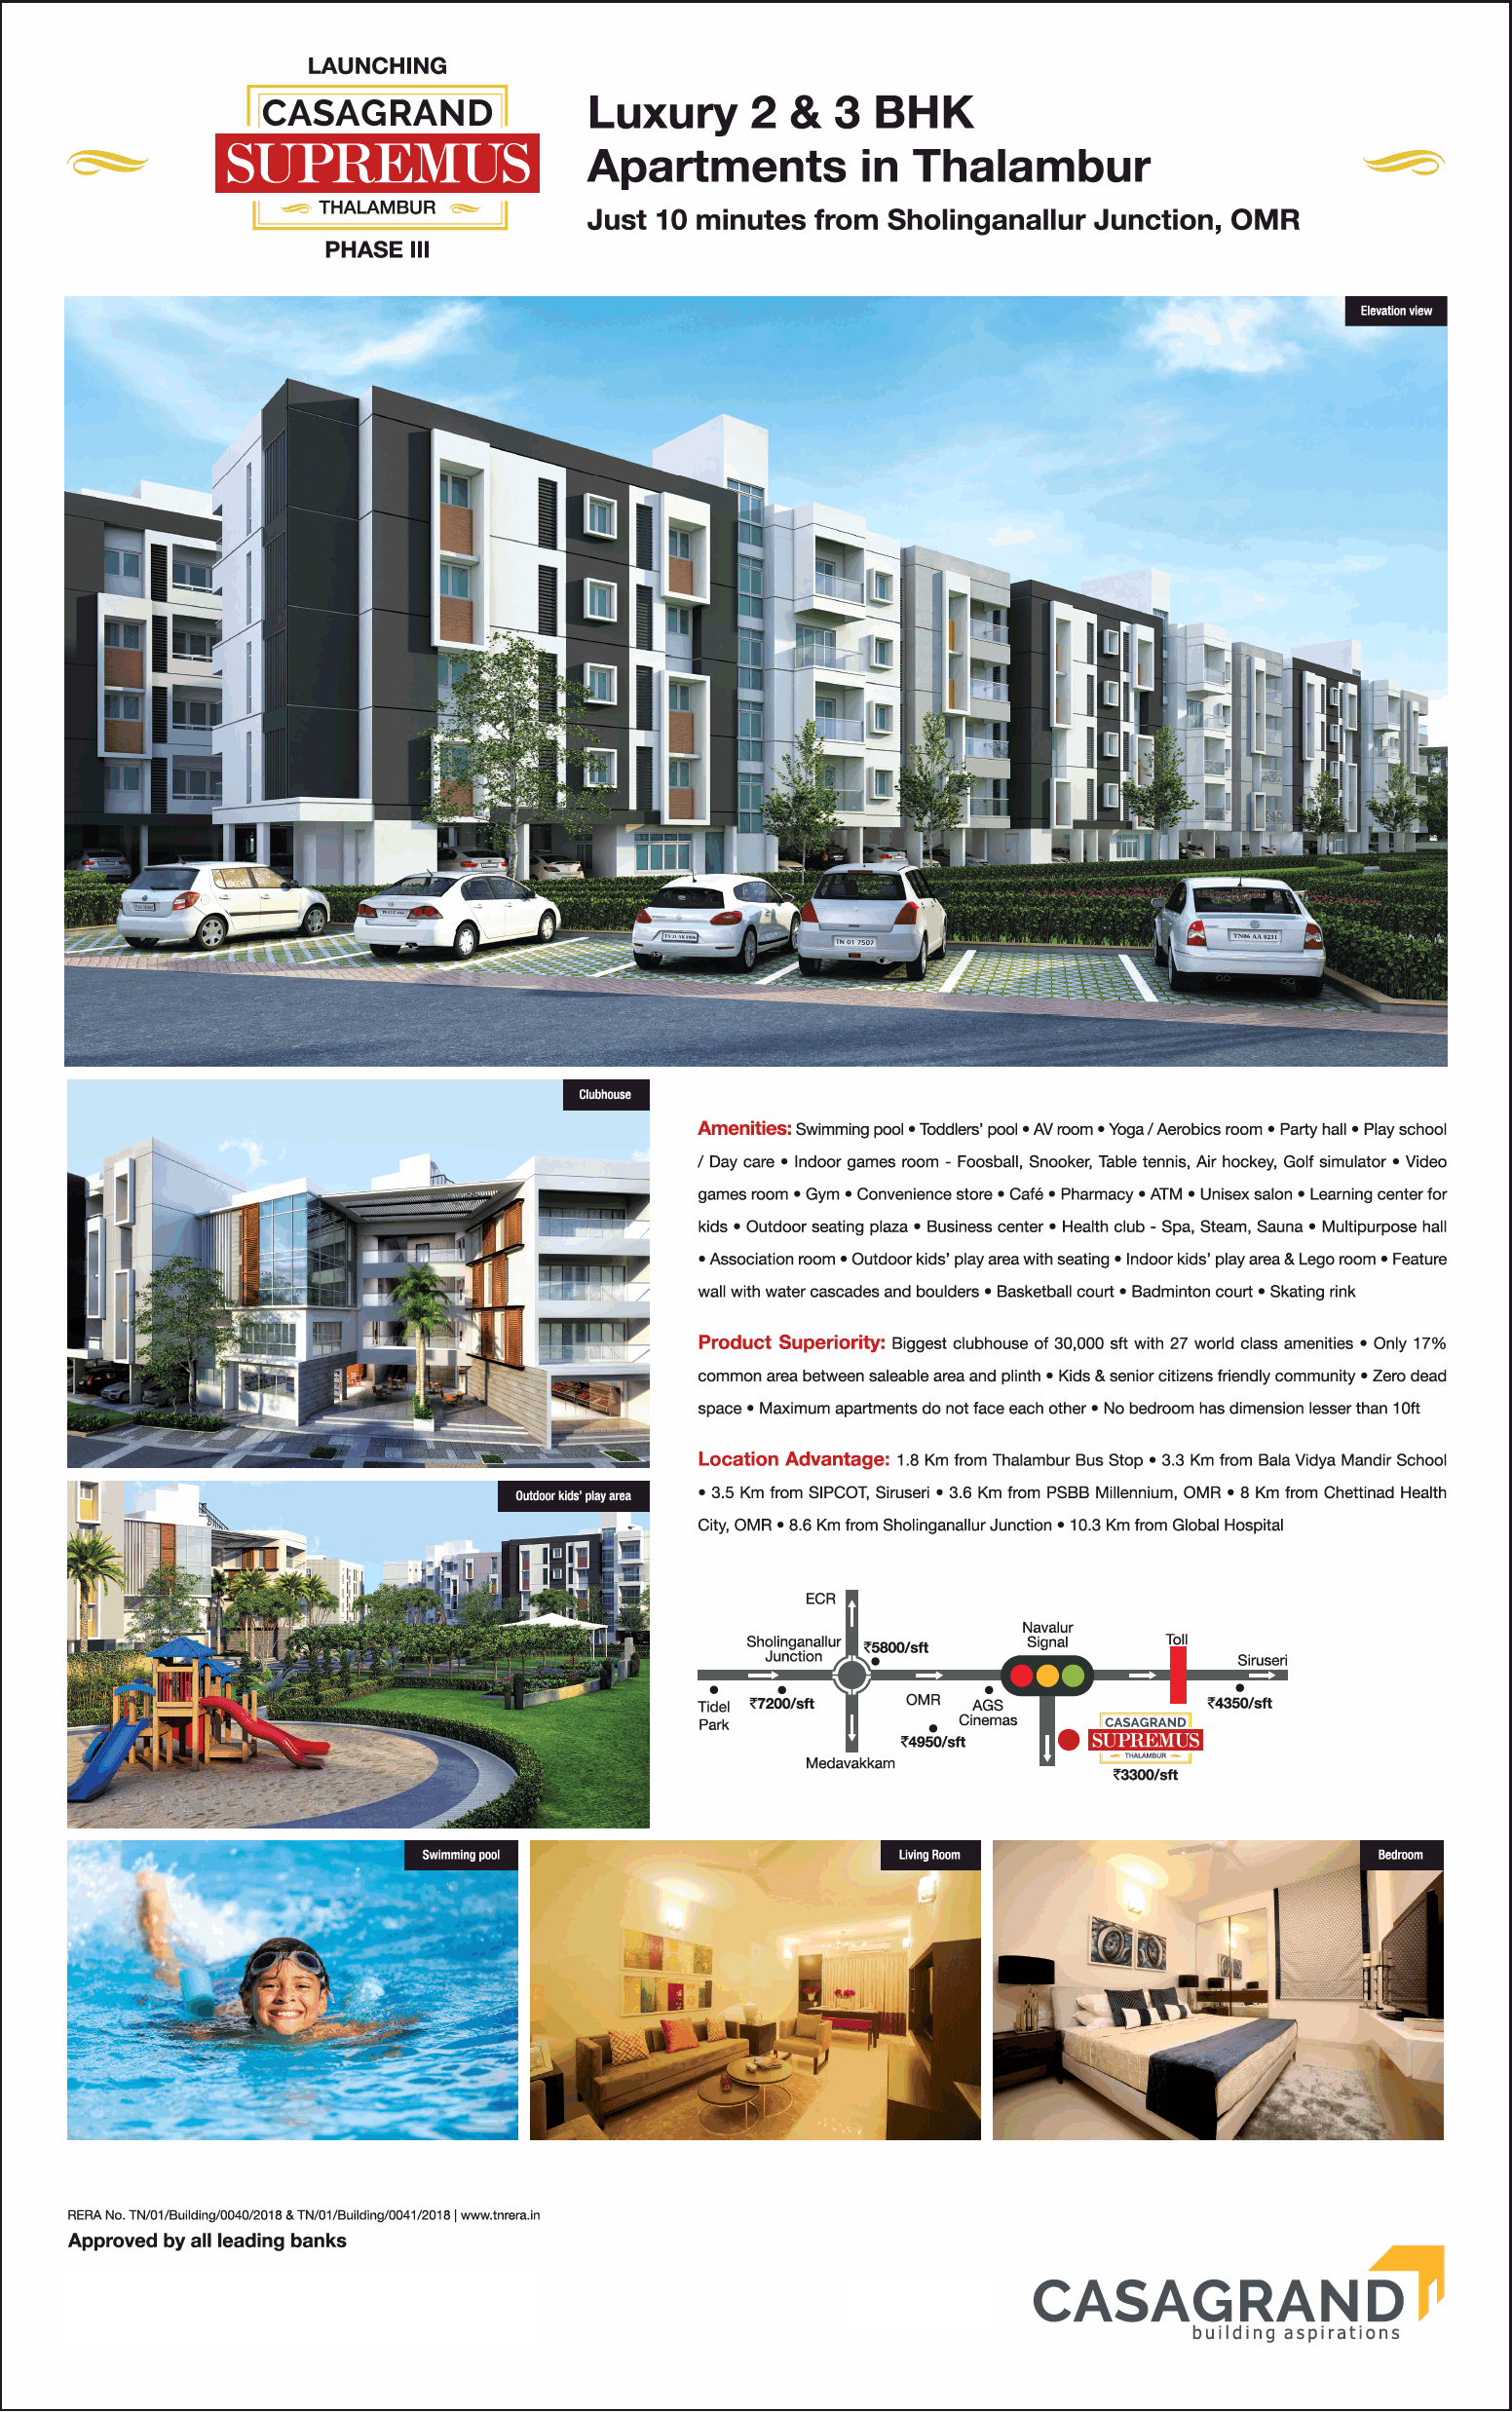 Launching luxury 2 & 3 bhk apartments at Casagrand Supremus Phase 3 in Chennai Update